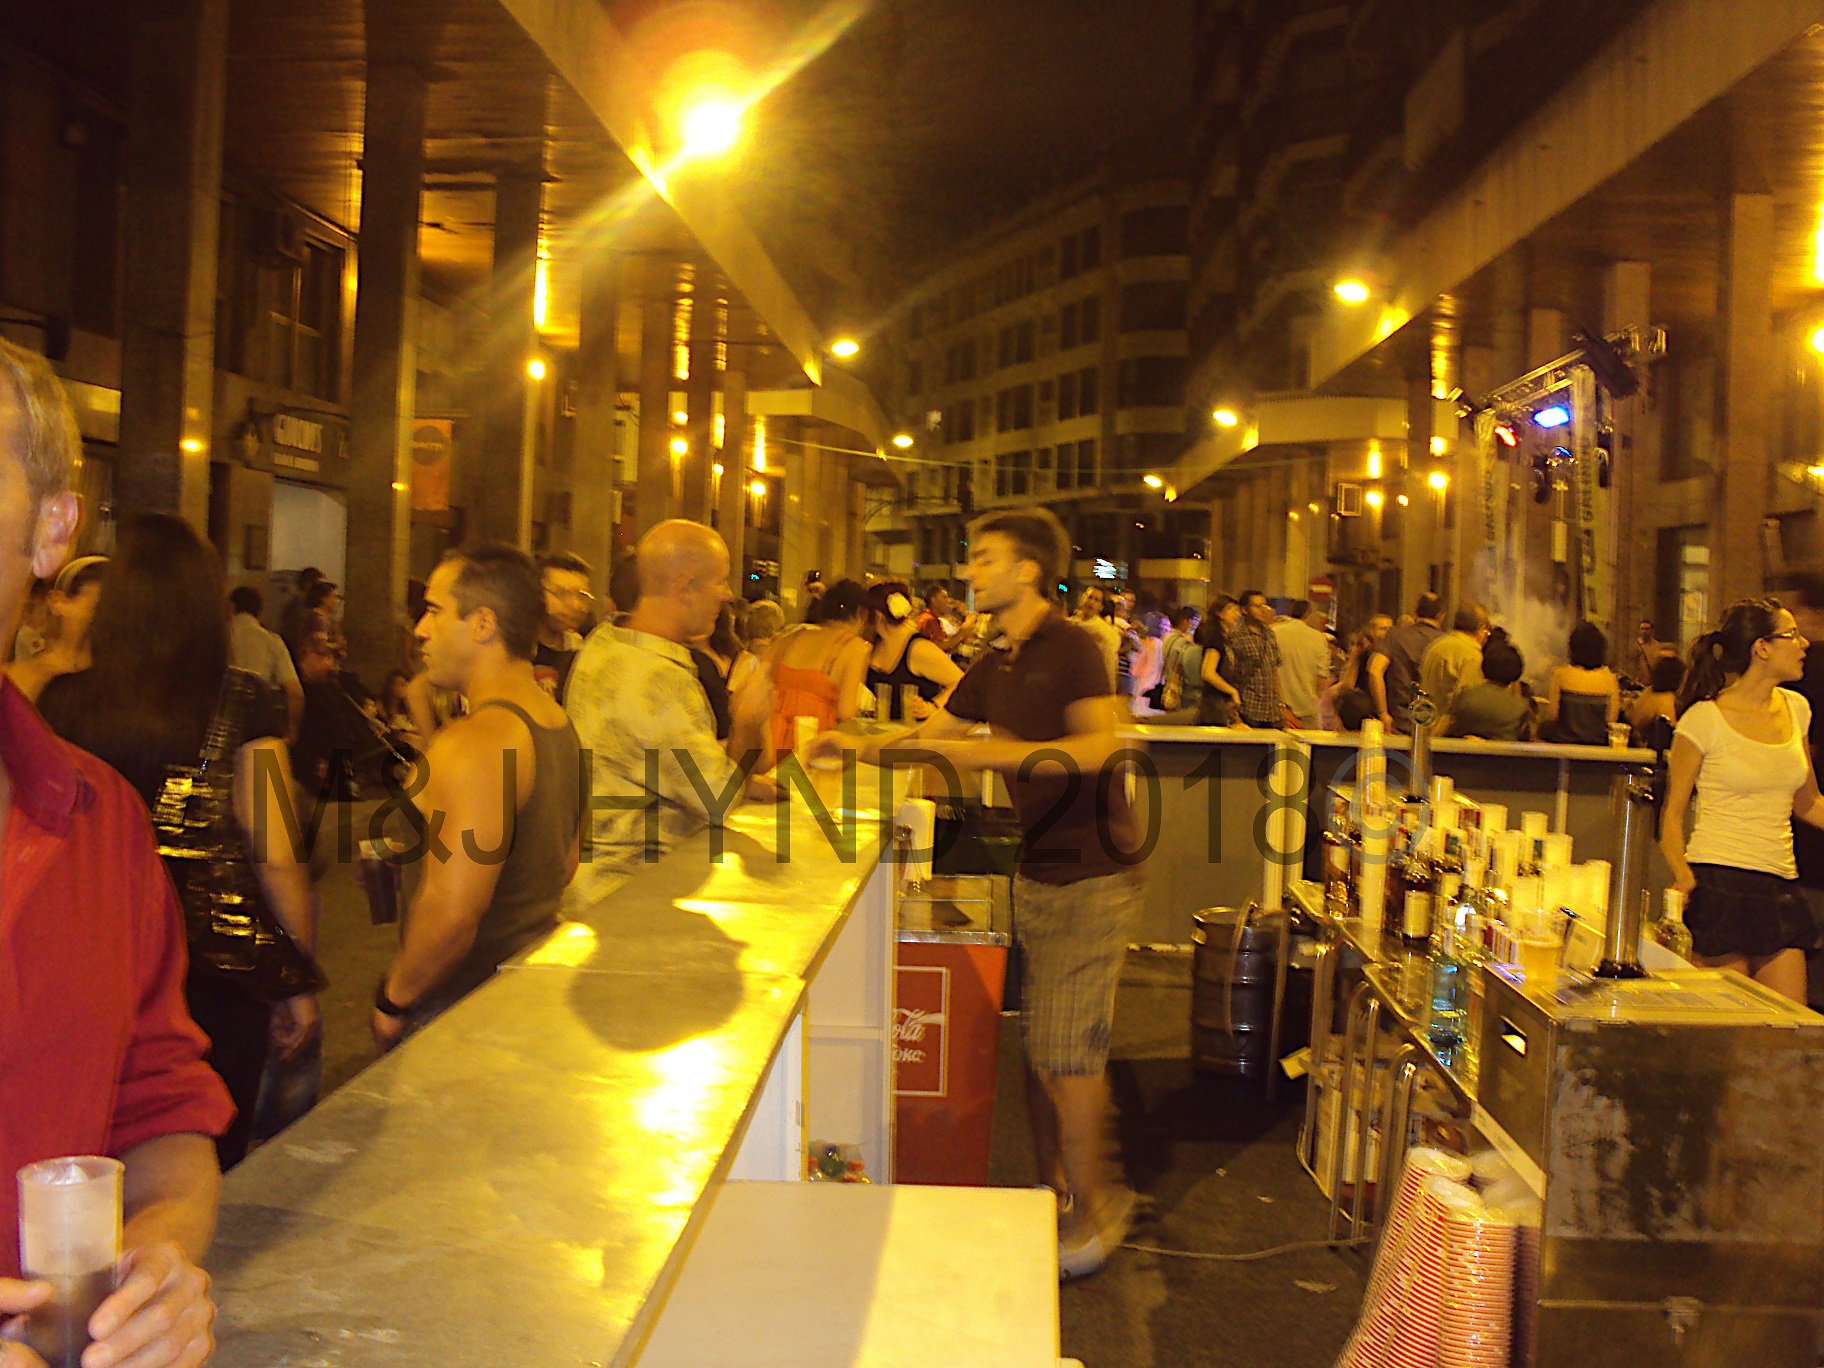 typically a busy street, tonight a huge open bar